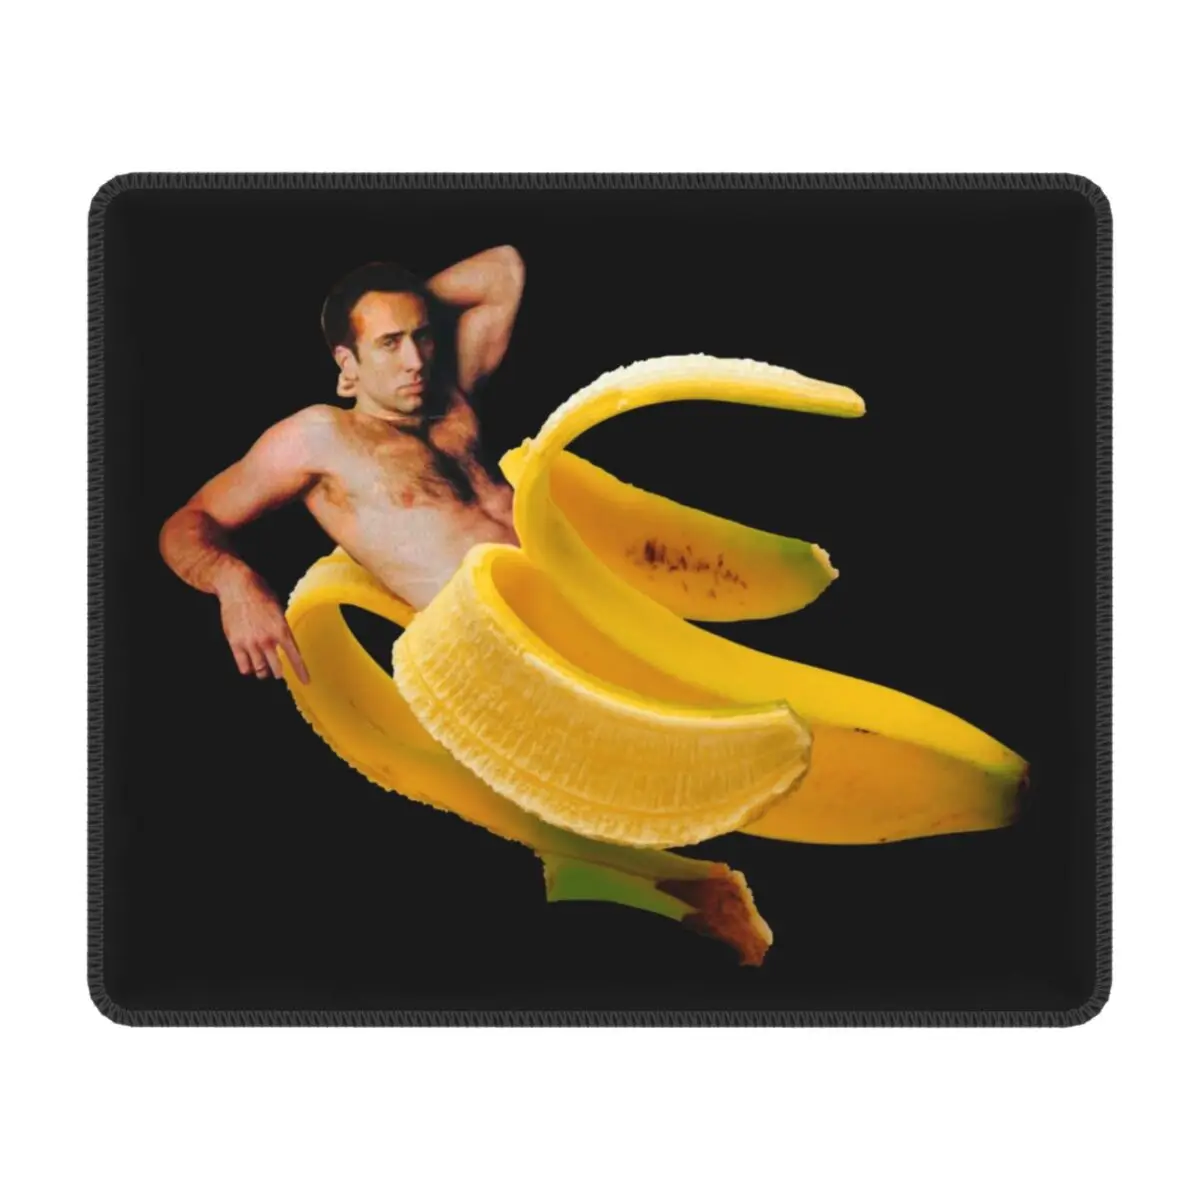 

Nicolas Cage In A Banana Laptop Mouse Pad Waterproof Mousepad with Stitched Edges Non-Slip Rubber Funny Meme Mouse Mat for Gamer